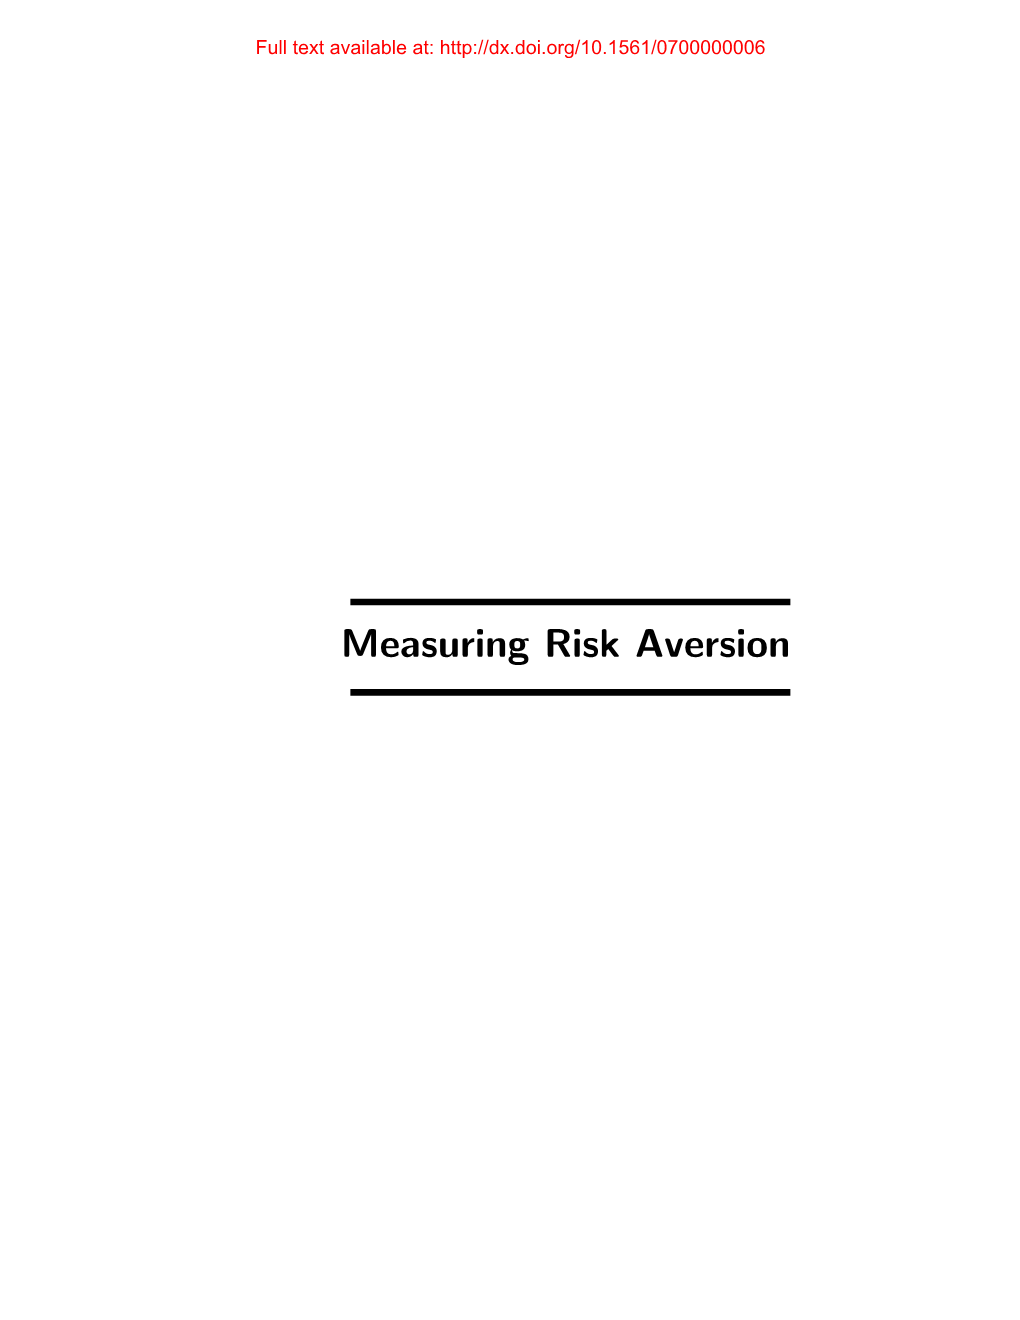 Measuring Risk Aversion Full Text Available At